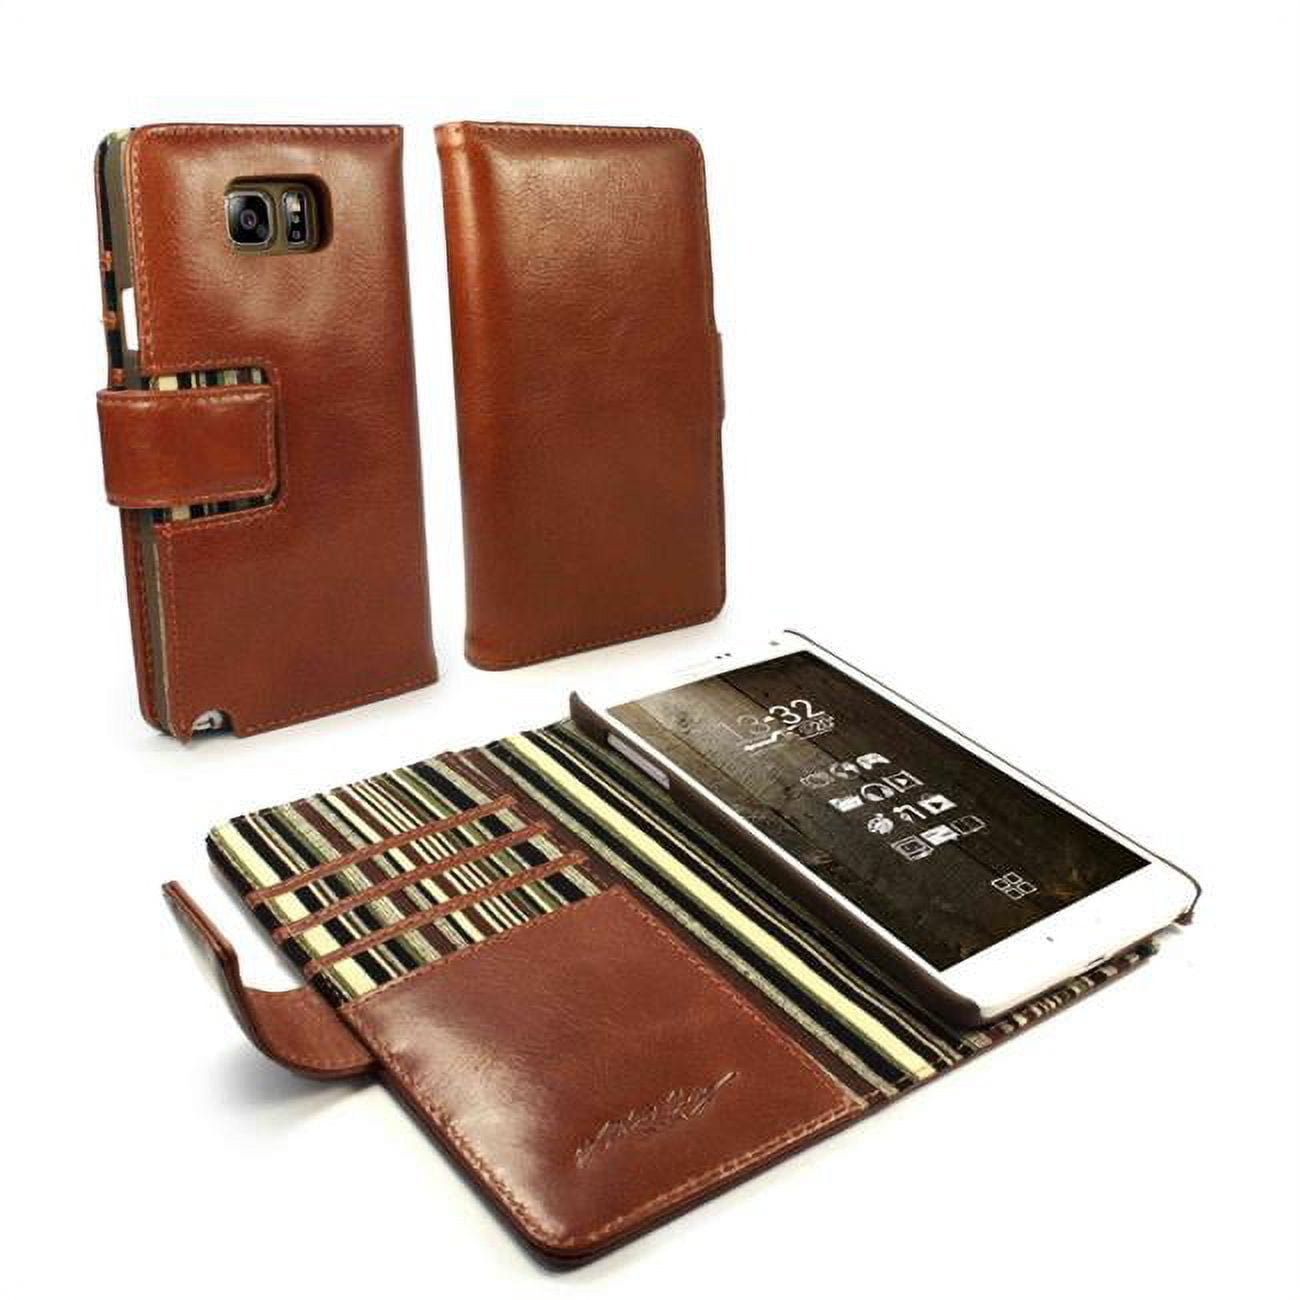 Tuff Luv I7-46 Alston Craig Vintage Genuine Leather Wallet Case Cover for Samsung Galaxy Note 8 - Brown -  Ashtead Retail & Wholesale, I7_46